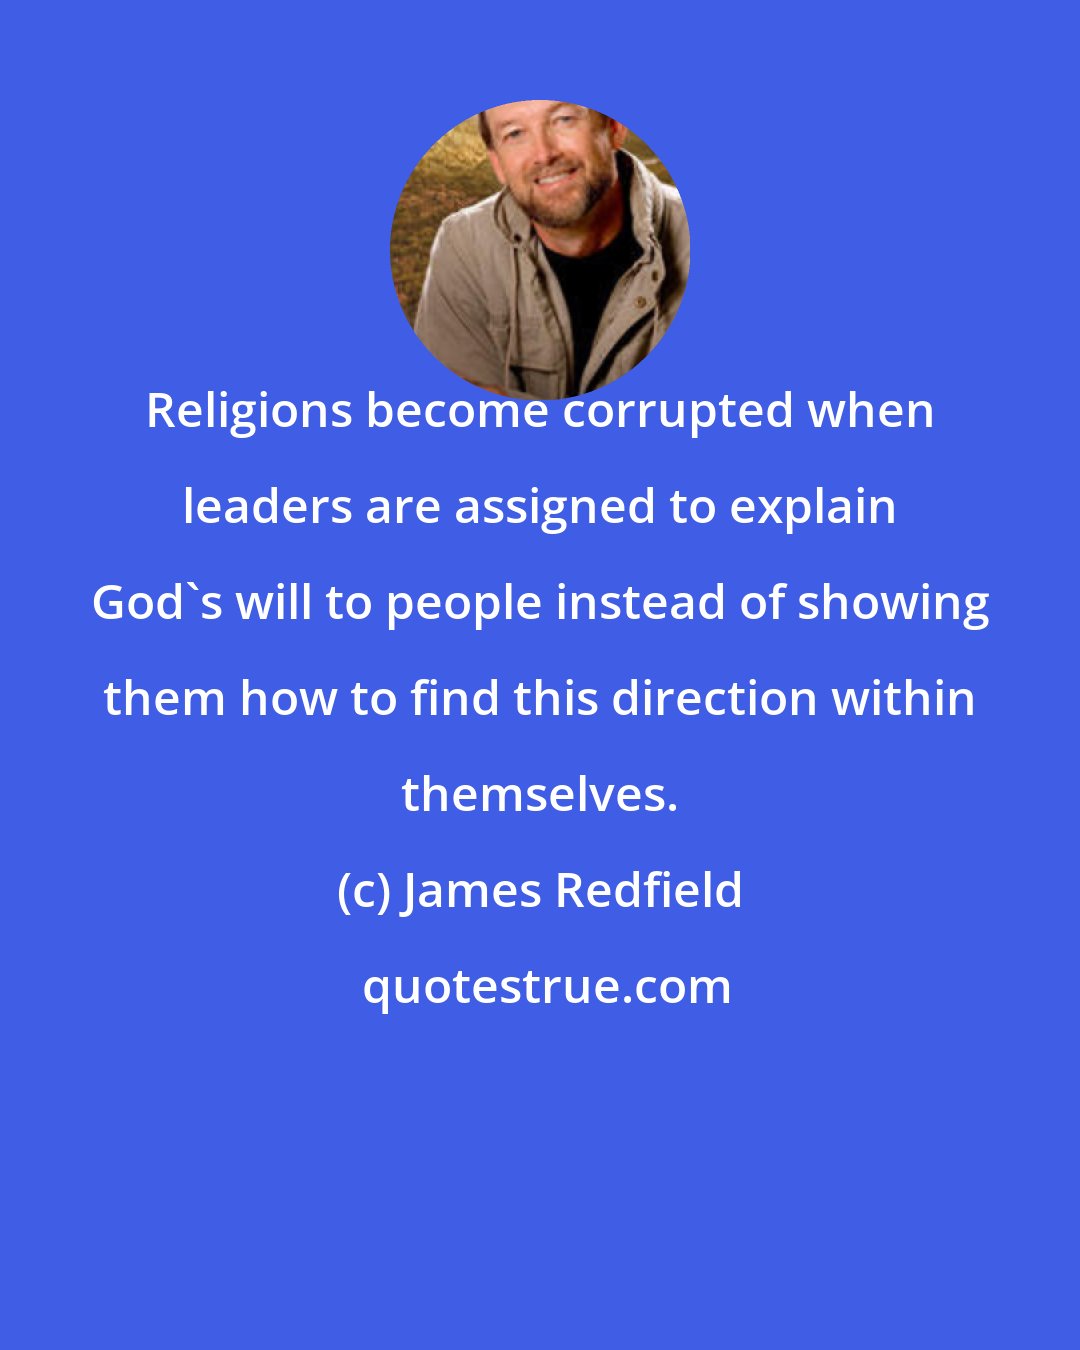 James Redfield: Religions become corrupted when leaders are assigned to explain God's will to people instead of showing them how to find this direction within themselves.